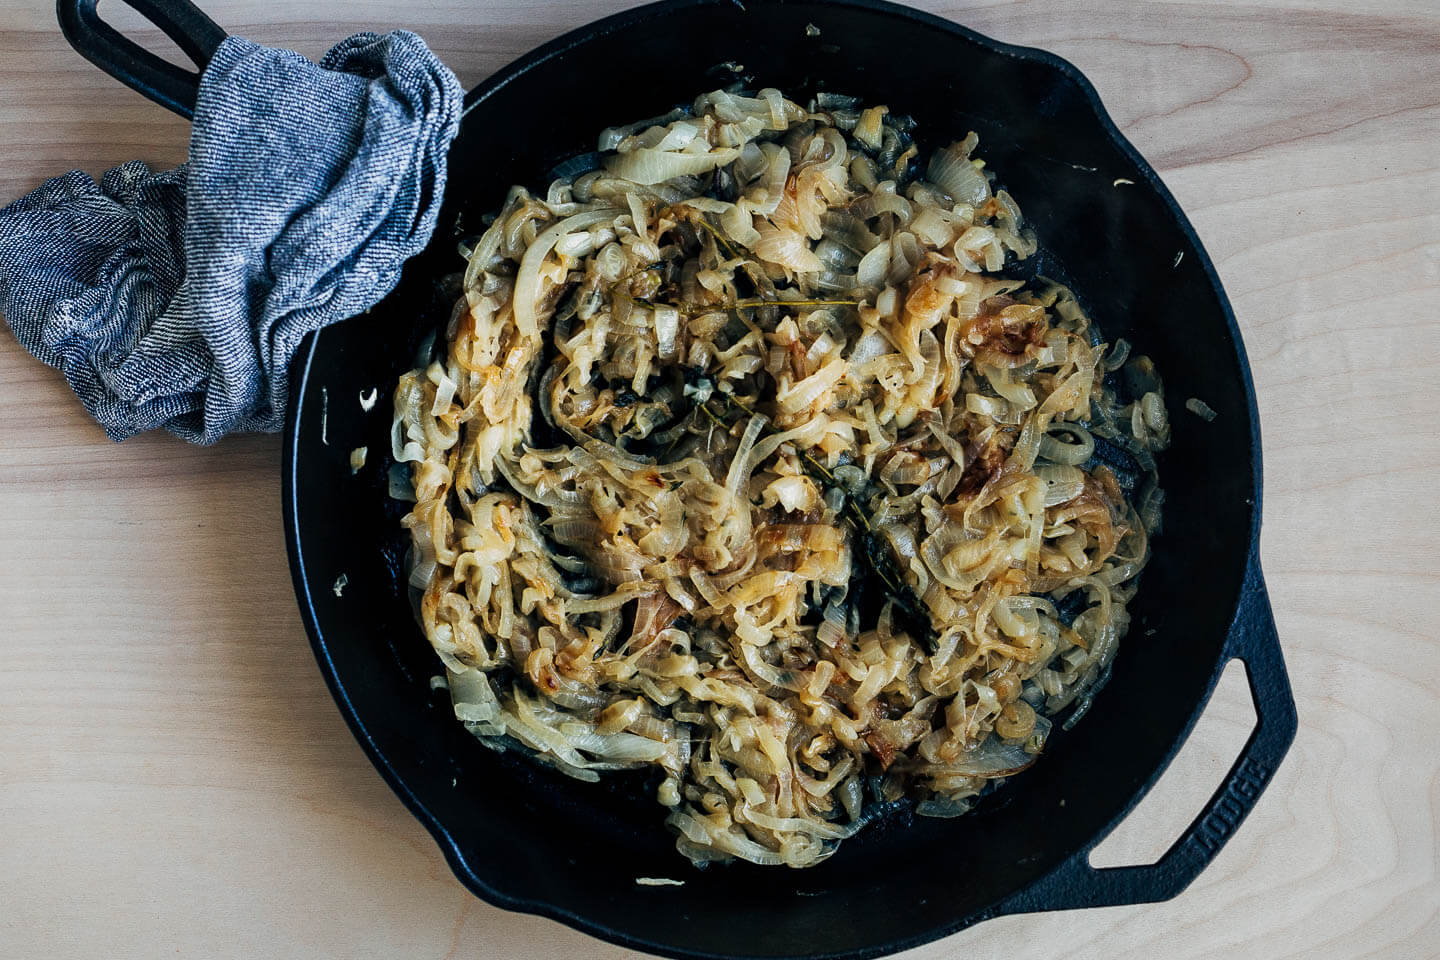 A cast iron skillet with caramelized onions